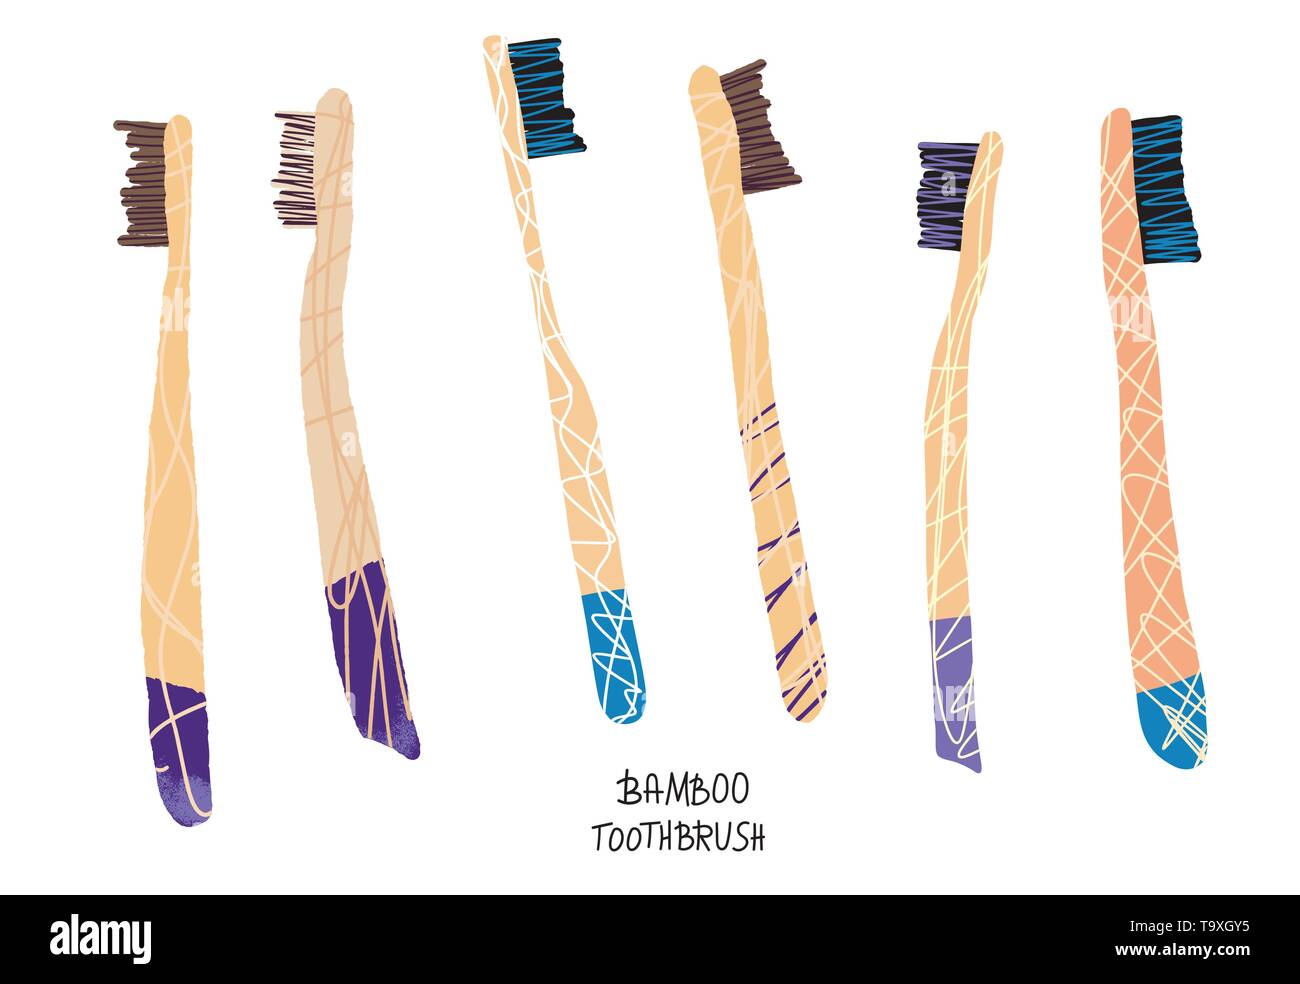 Bamboo toothbrushes set isolated. Zero waste tips. Eco-friendly collection of brushes. Vector illustration. Stock Vector